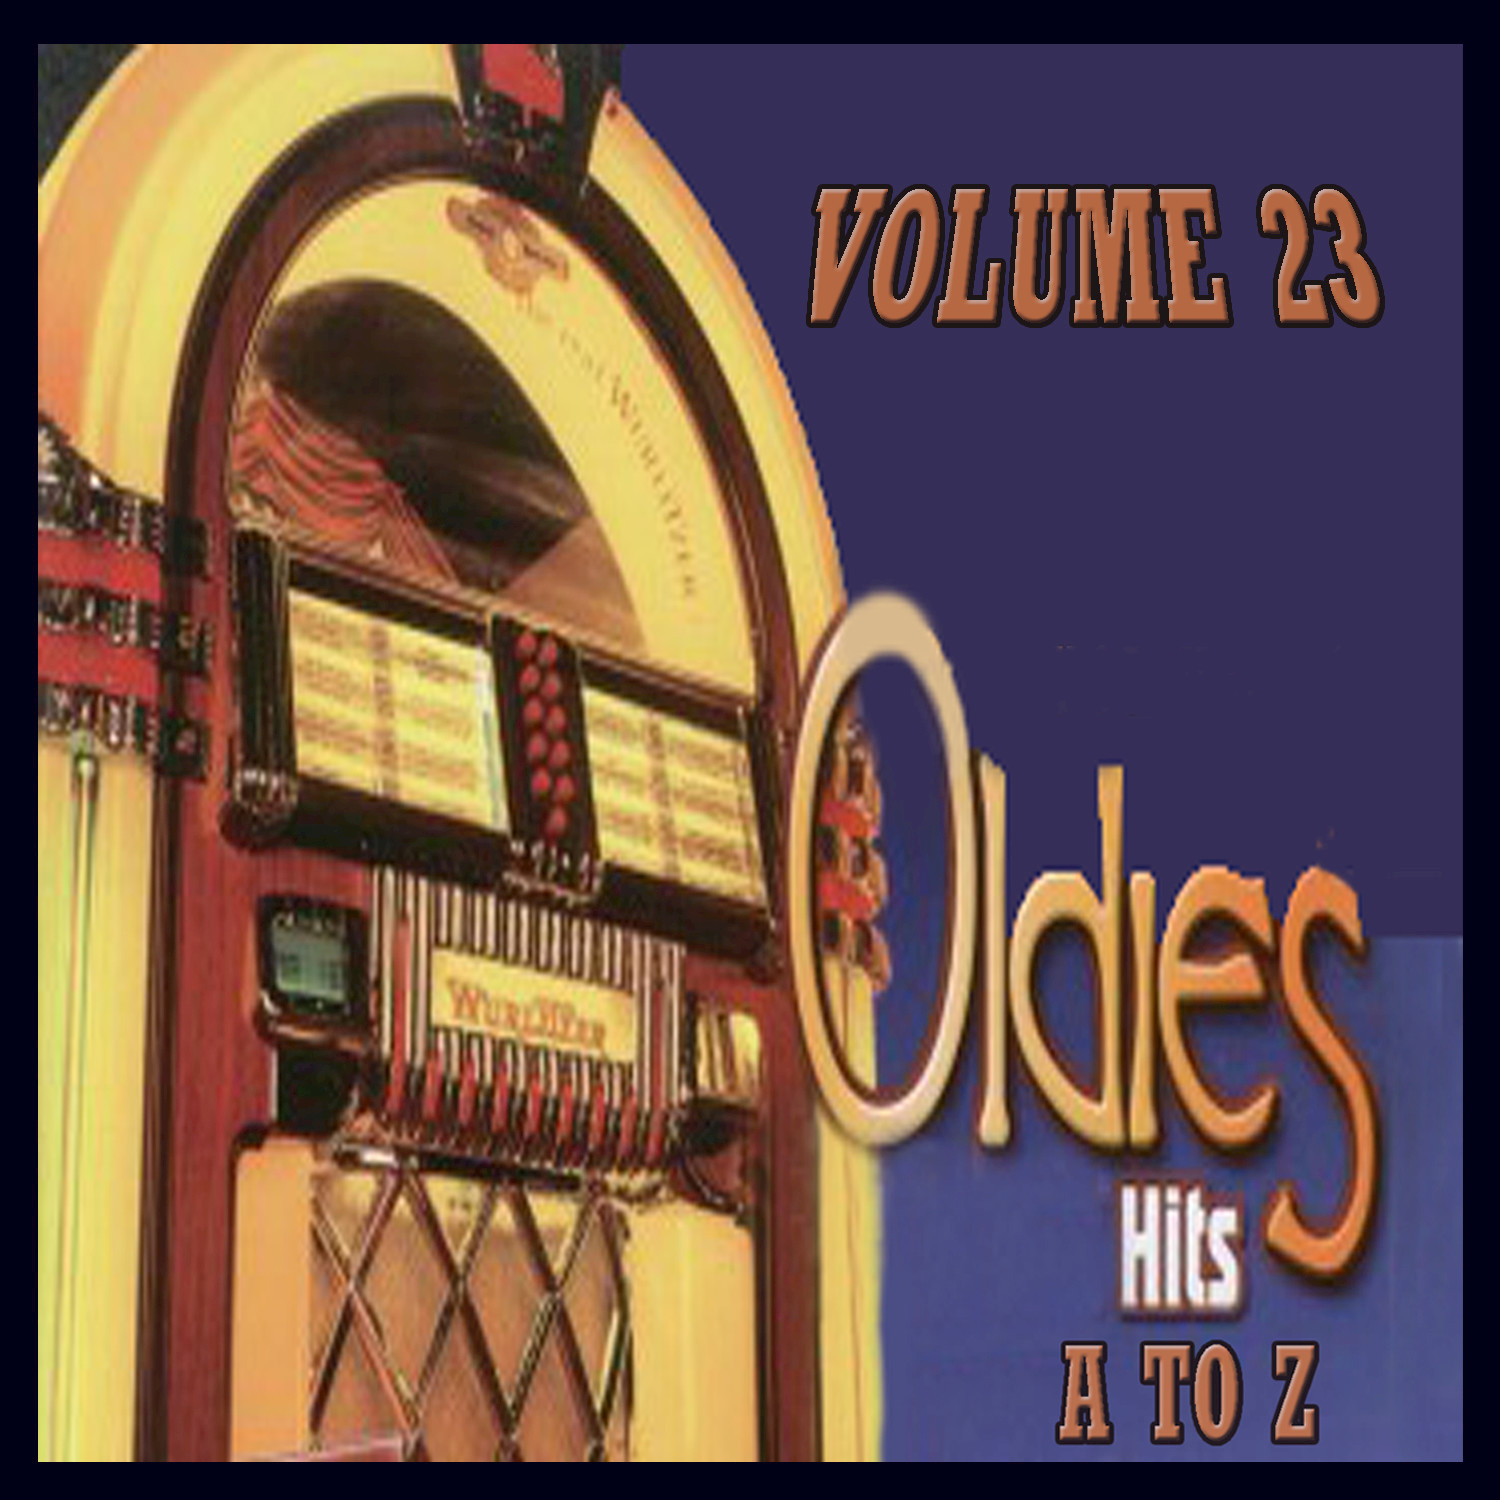 Oldies Hits A to Z, Vol. 23